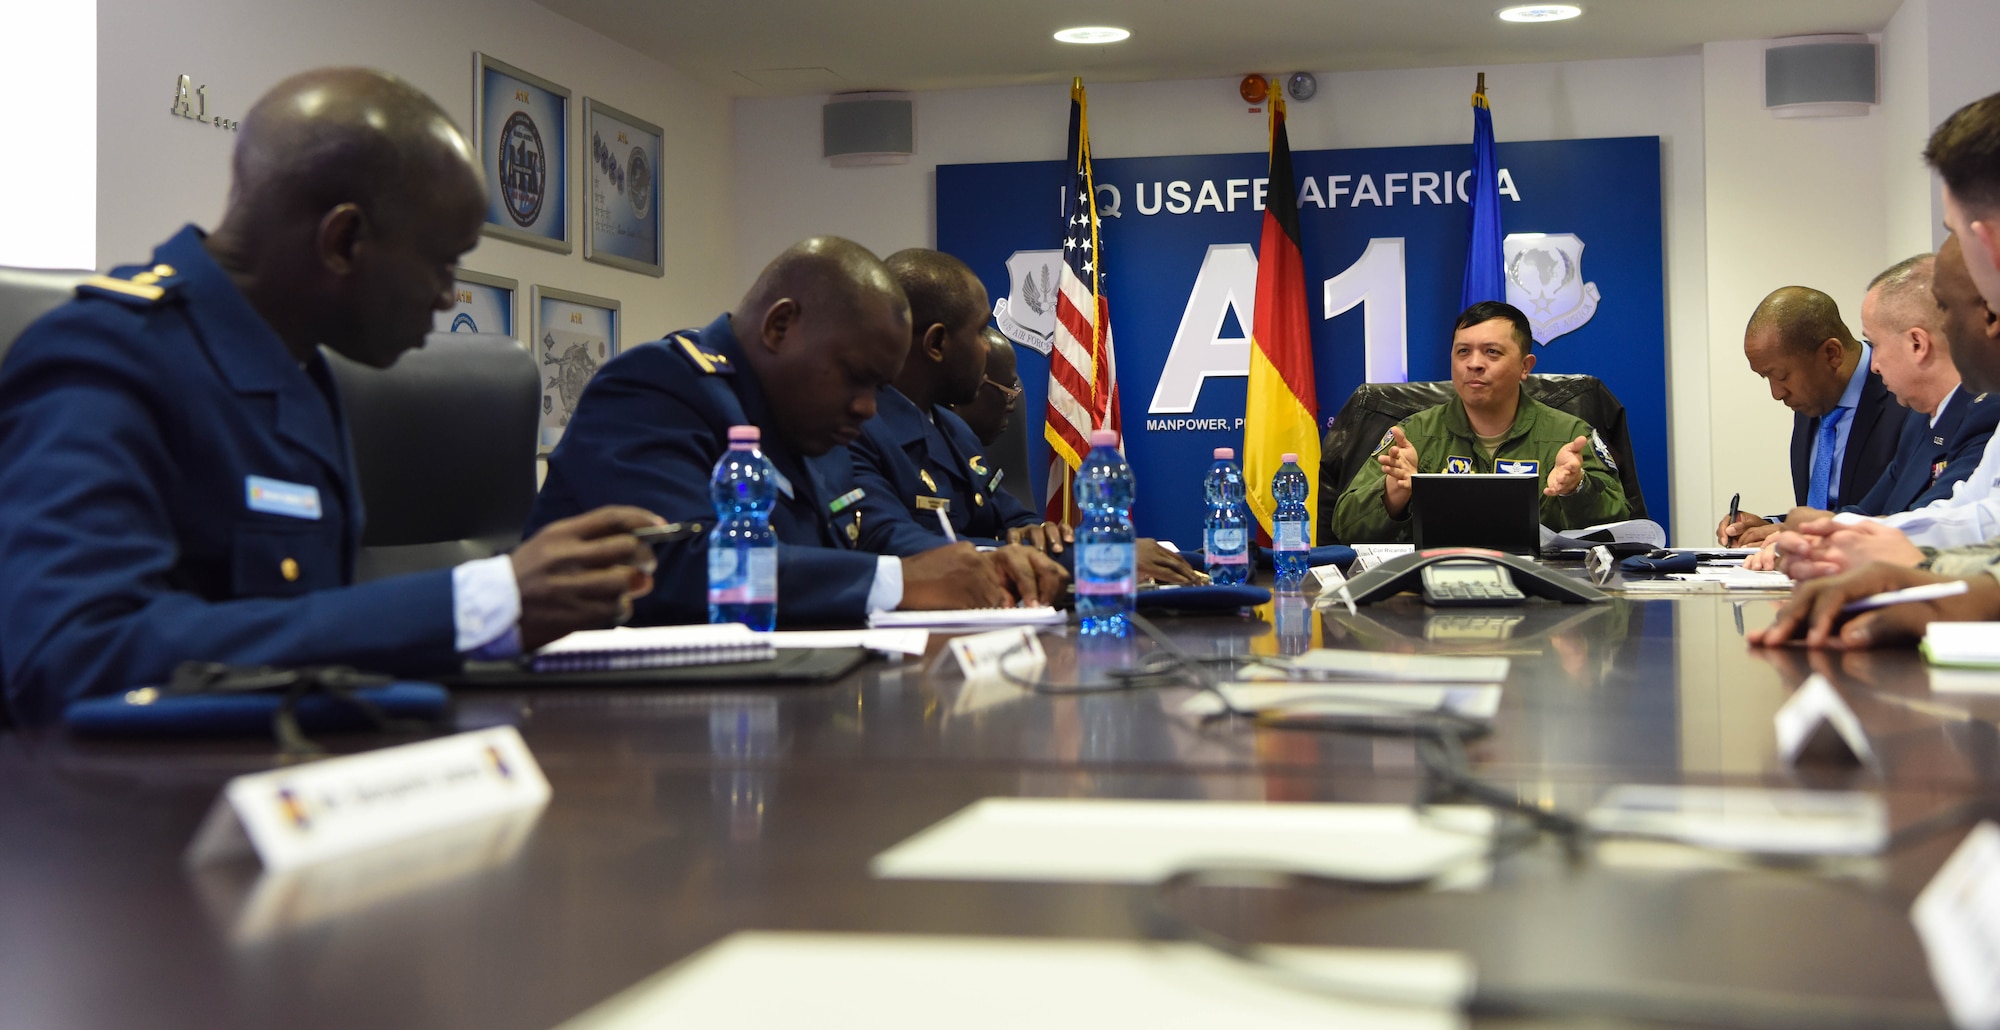 U.S. Air Force Col. Ric Trimillos, U.S. Air Forces in Europe and Africa International Affairs Division chief, speaks to representatives with the Senegal Air Force about aircraft maintenance at USAFE Headquarters, on Ramstein Air Base, Germany, Feb. 16, 2018. The representatives visited USAFE - HQ was to facilitate discussions on force development, force sustainment, retention, growth management, aircraft maintenance, and logistics.